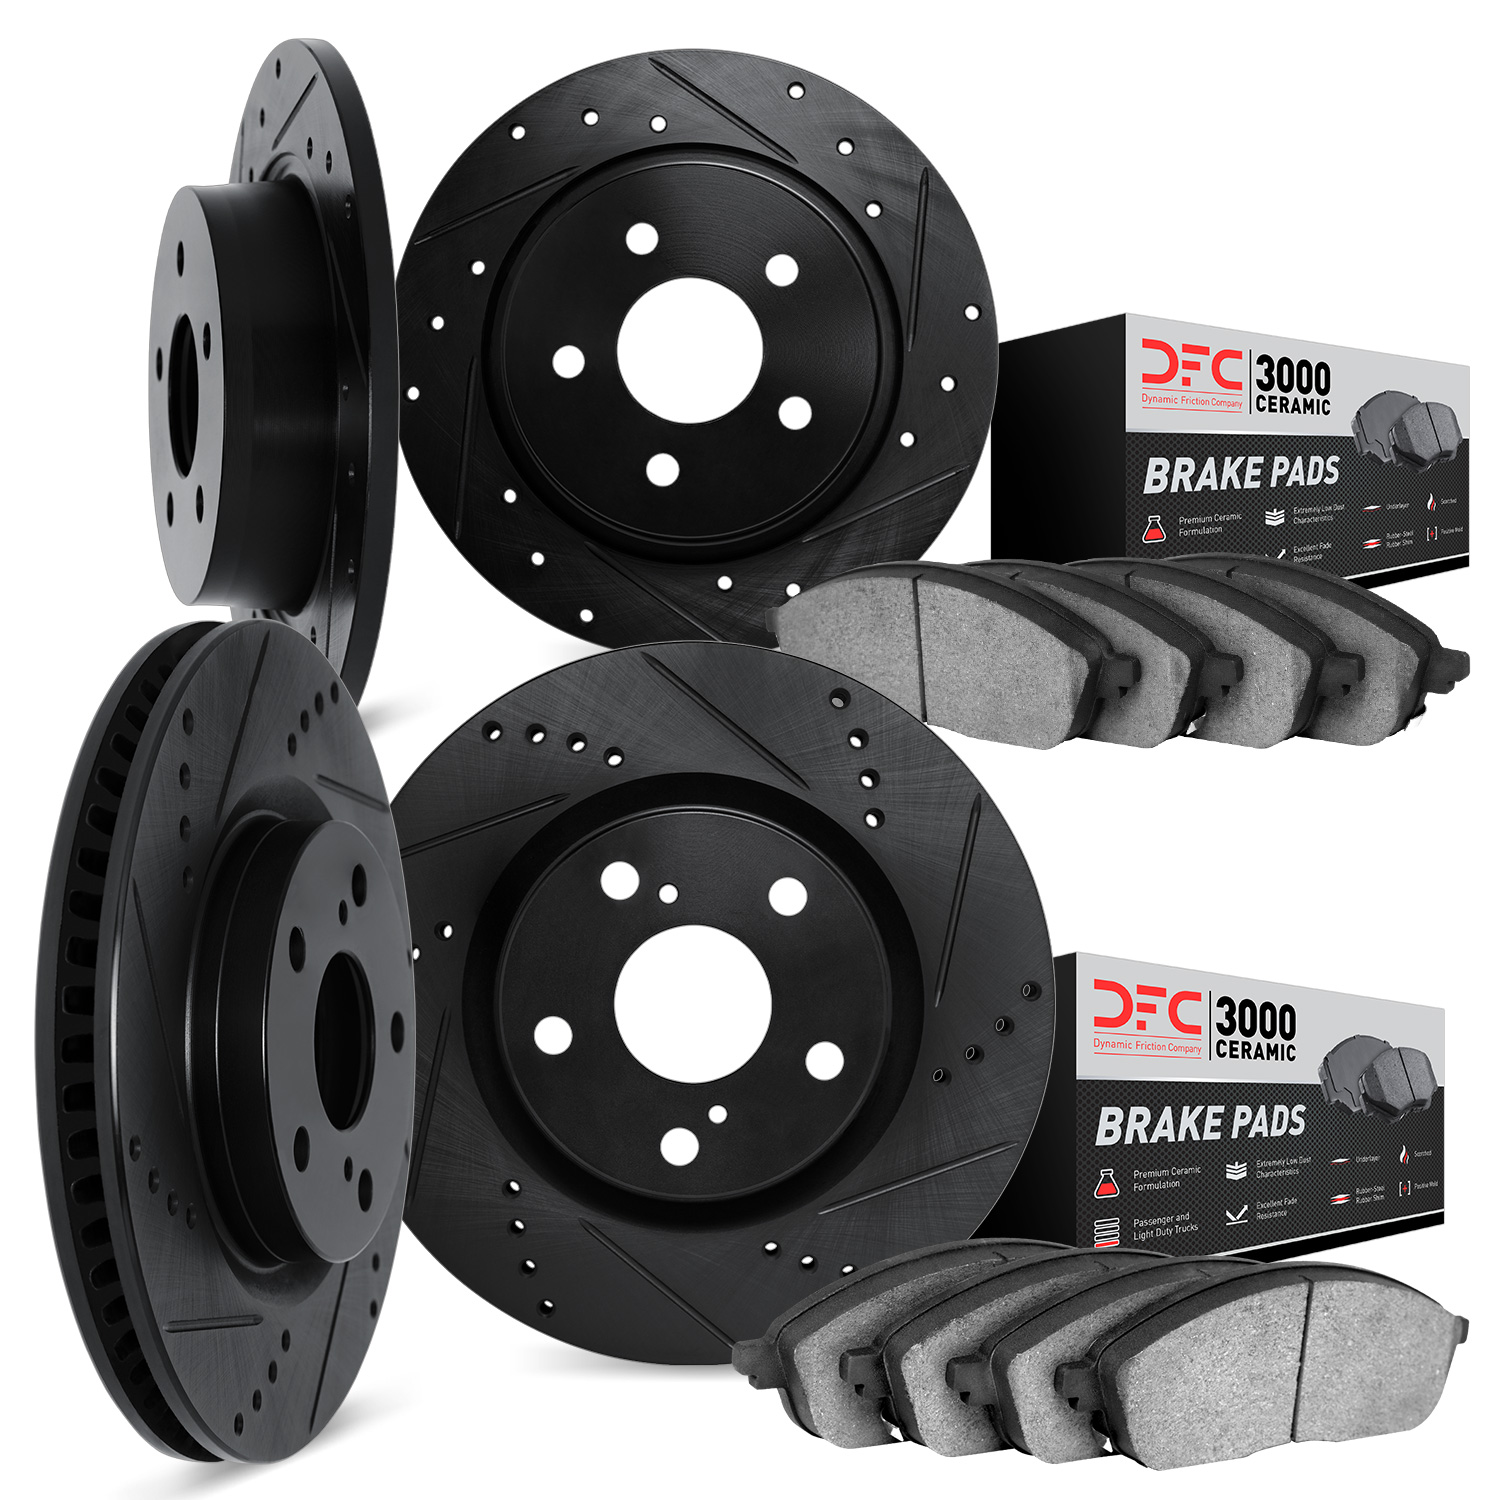 8304-59072 Drilled/Slotted Brake Rotors with 3000-Series Ceramic Brake Pads Kit [Black], 2006-2007 Acura/Honda, Position: Front